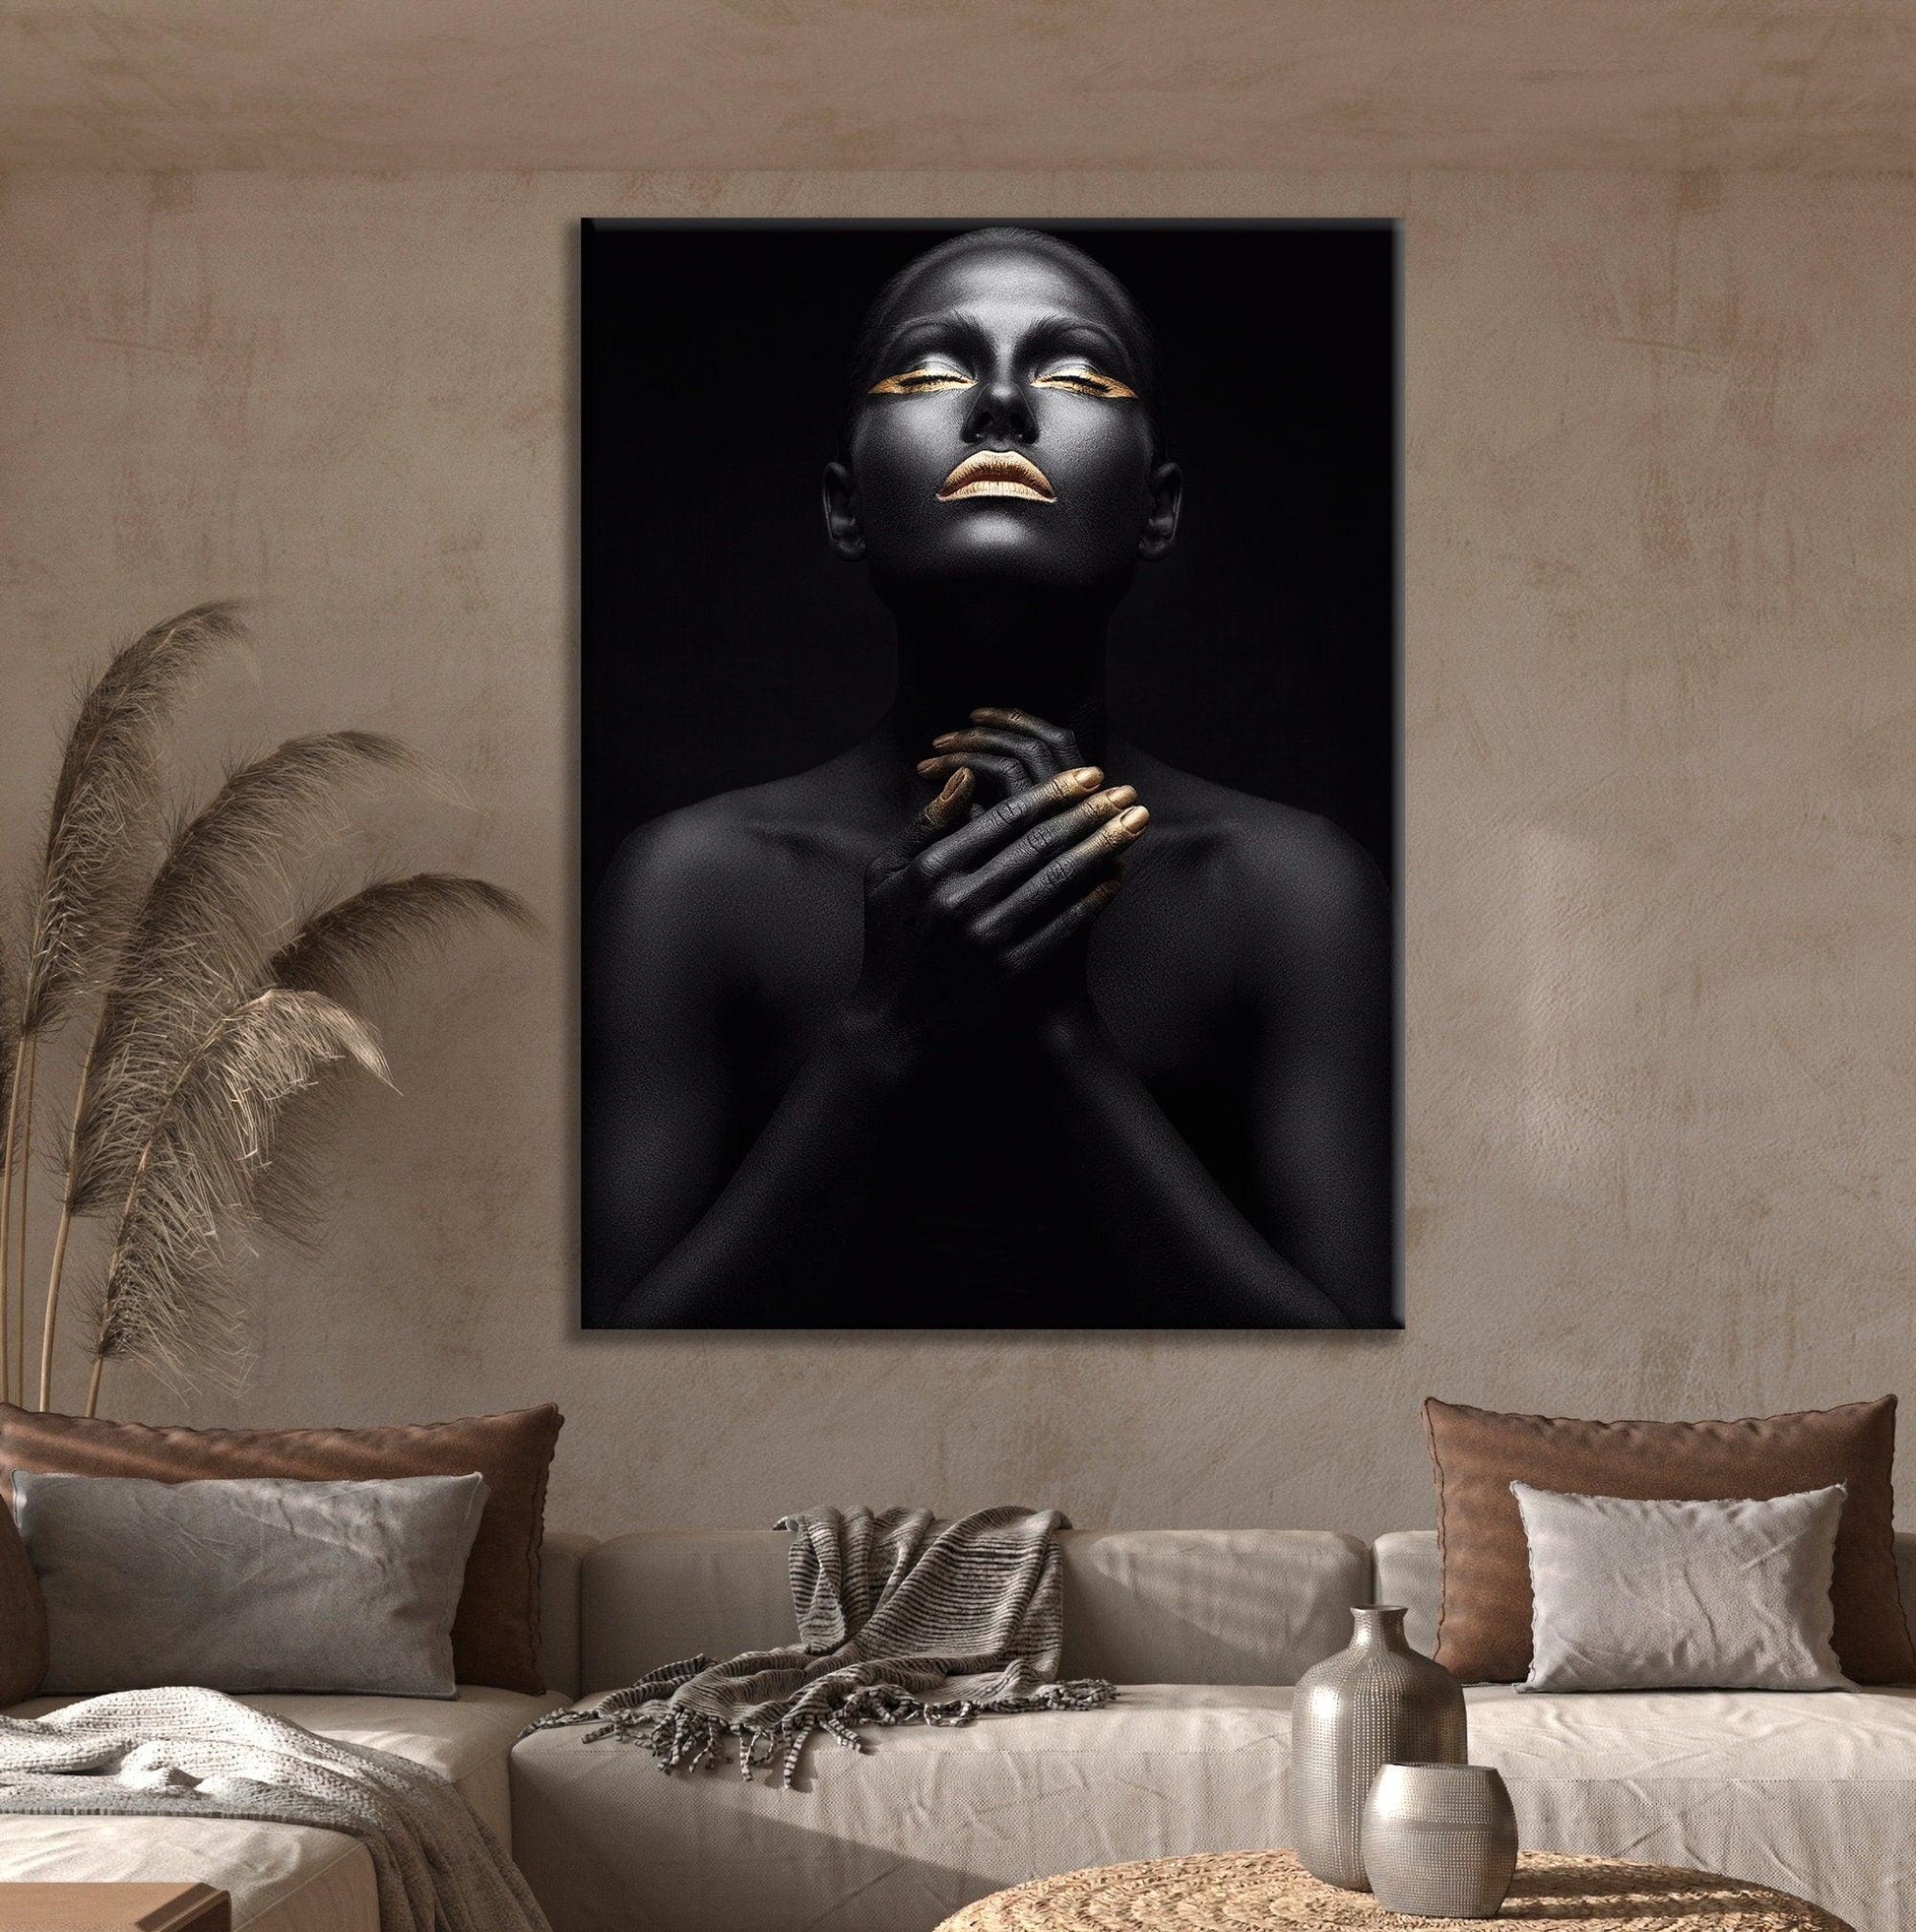 African Woman Wall Art on canvas | Wall Hanging, Mother's Day gift,  Modern Wall Art, Canvas Wall Set, extra Large Wall Art, african art